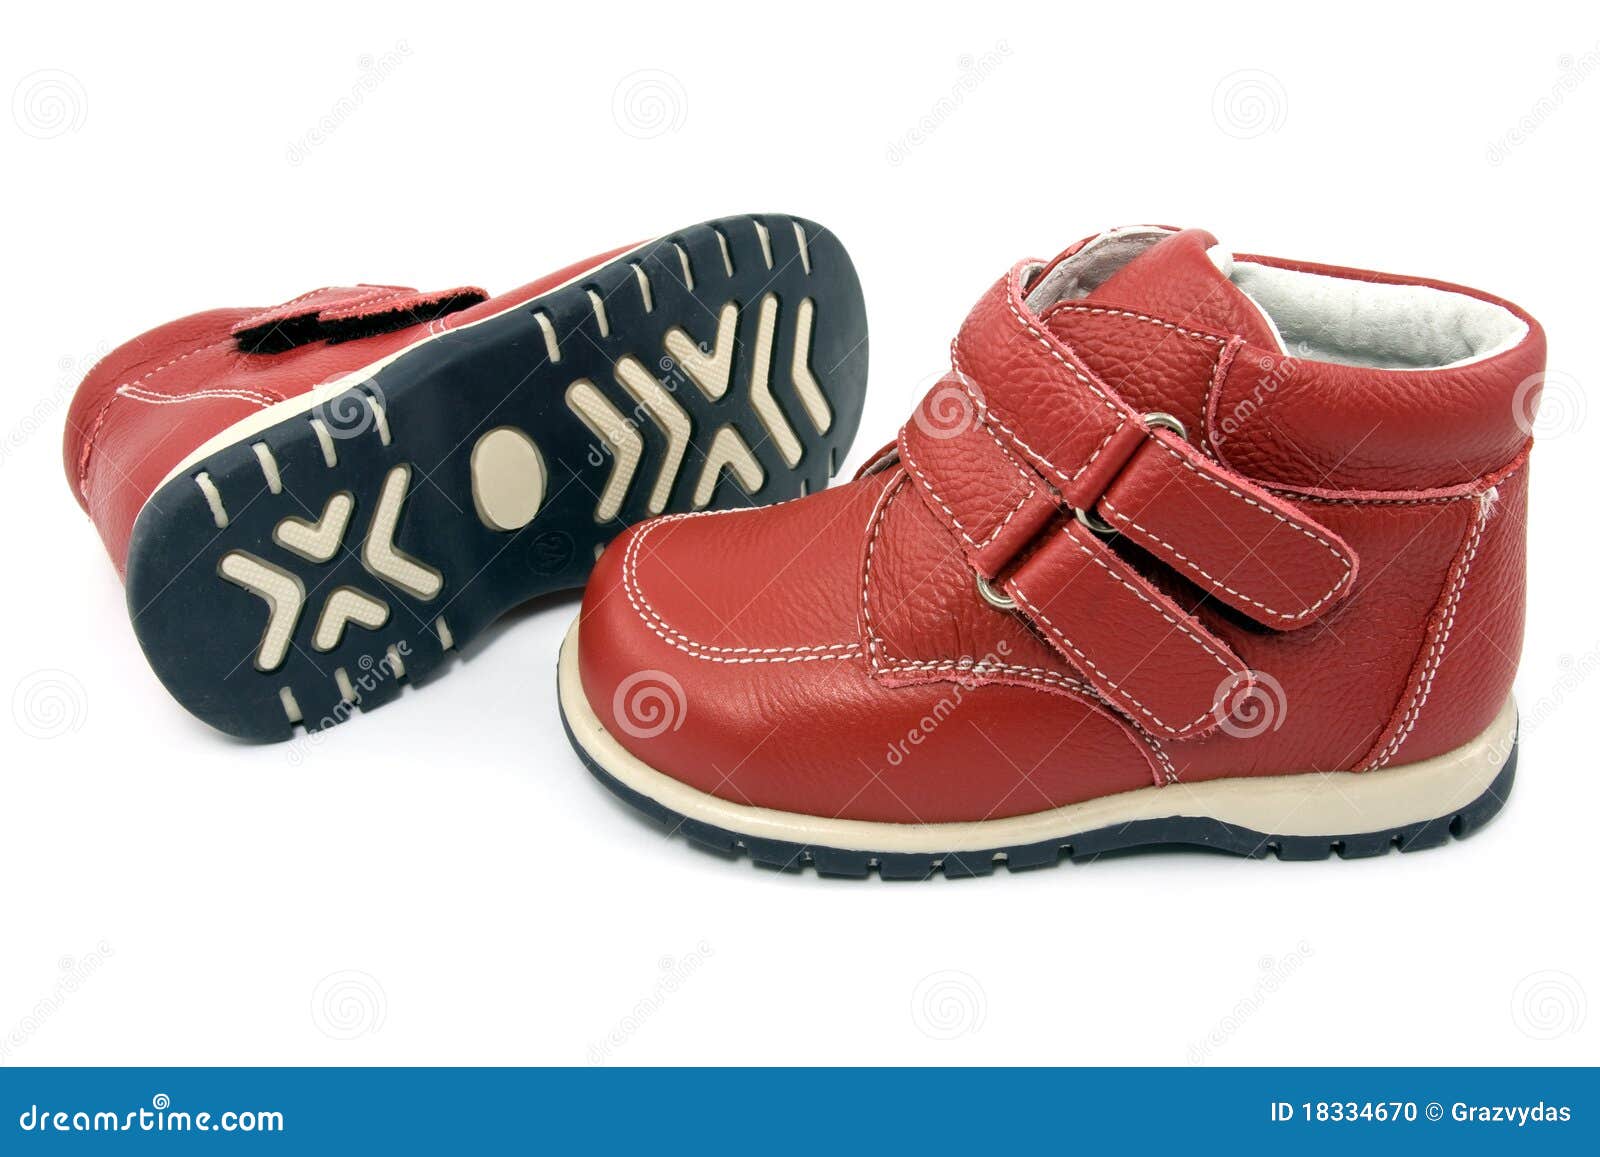 Pair of child s red shoes stock photo. Image of footwear - 18334670